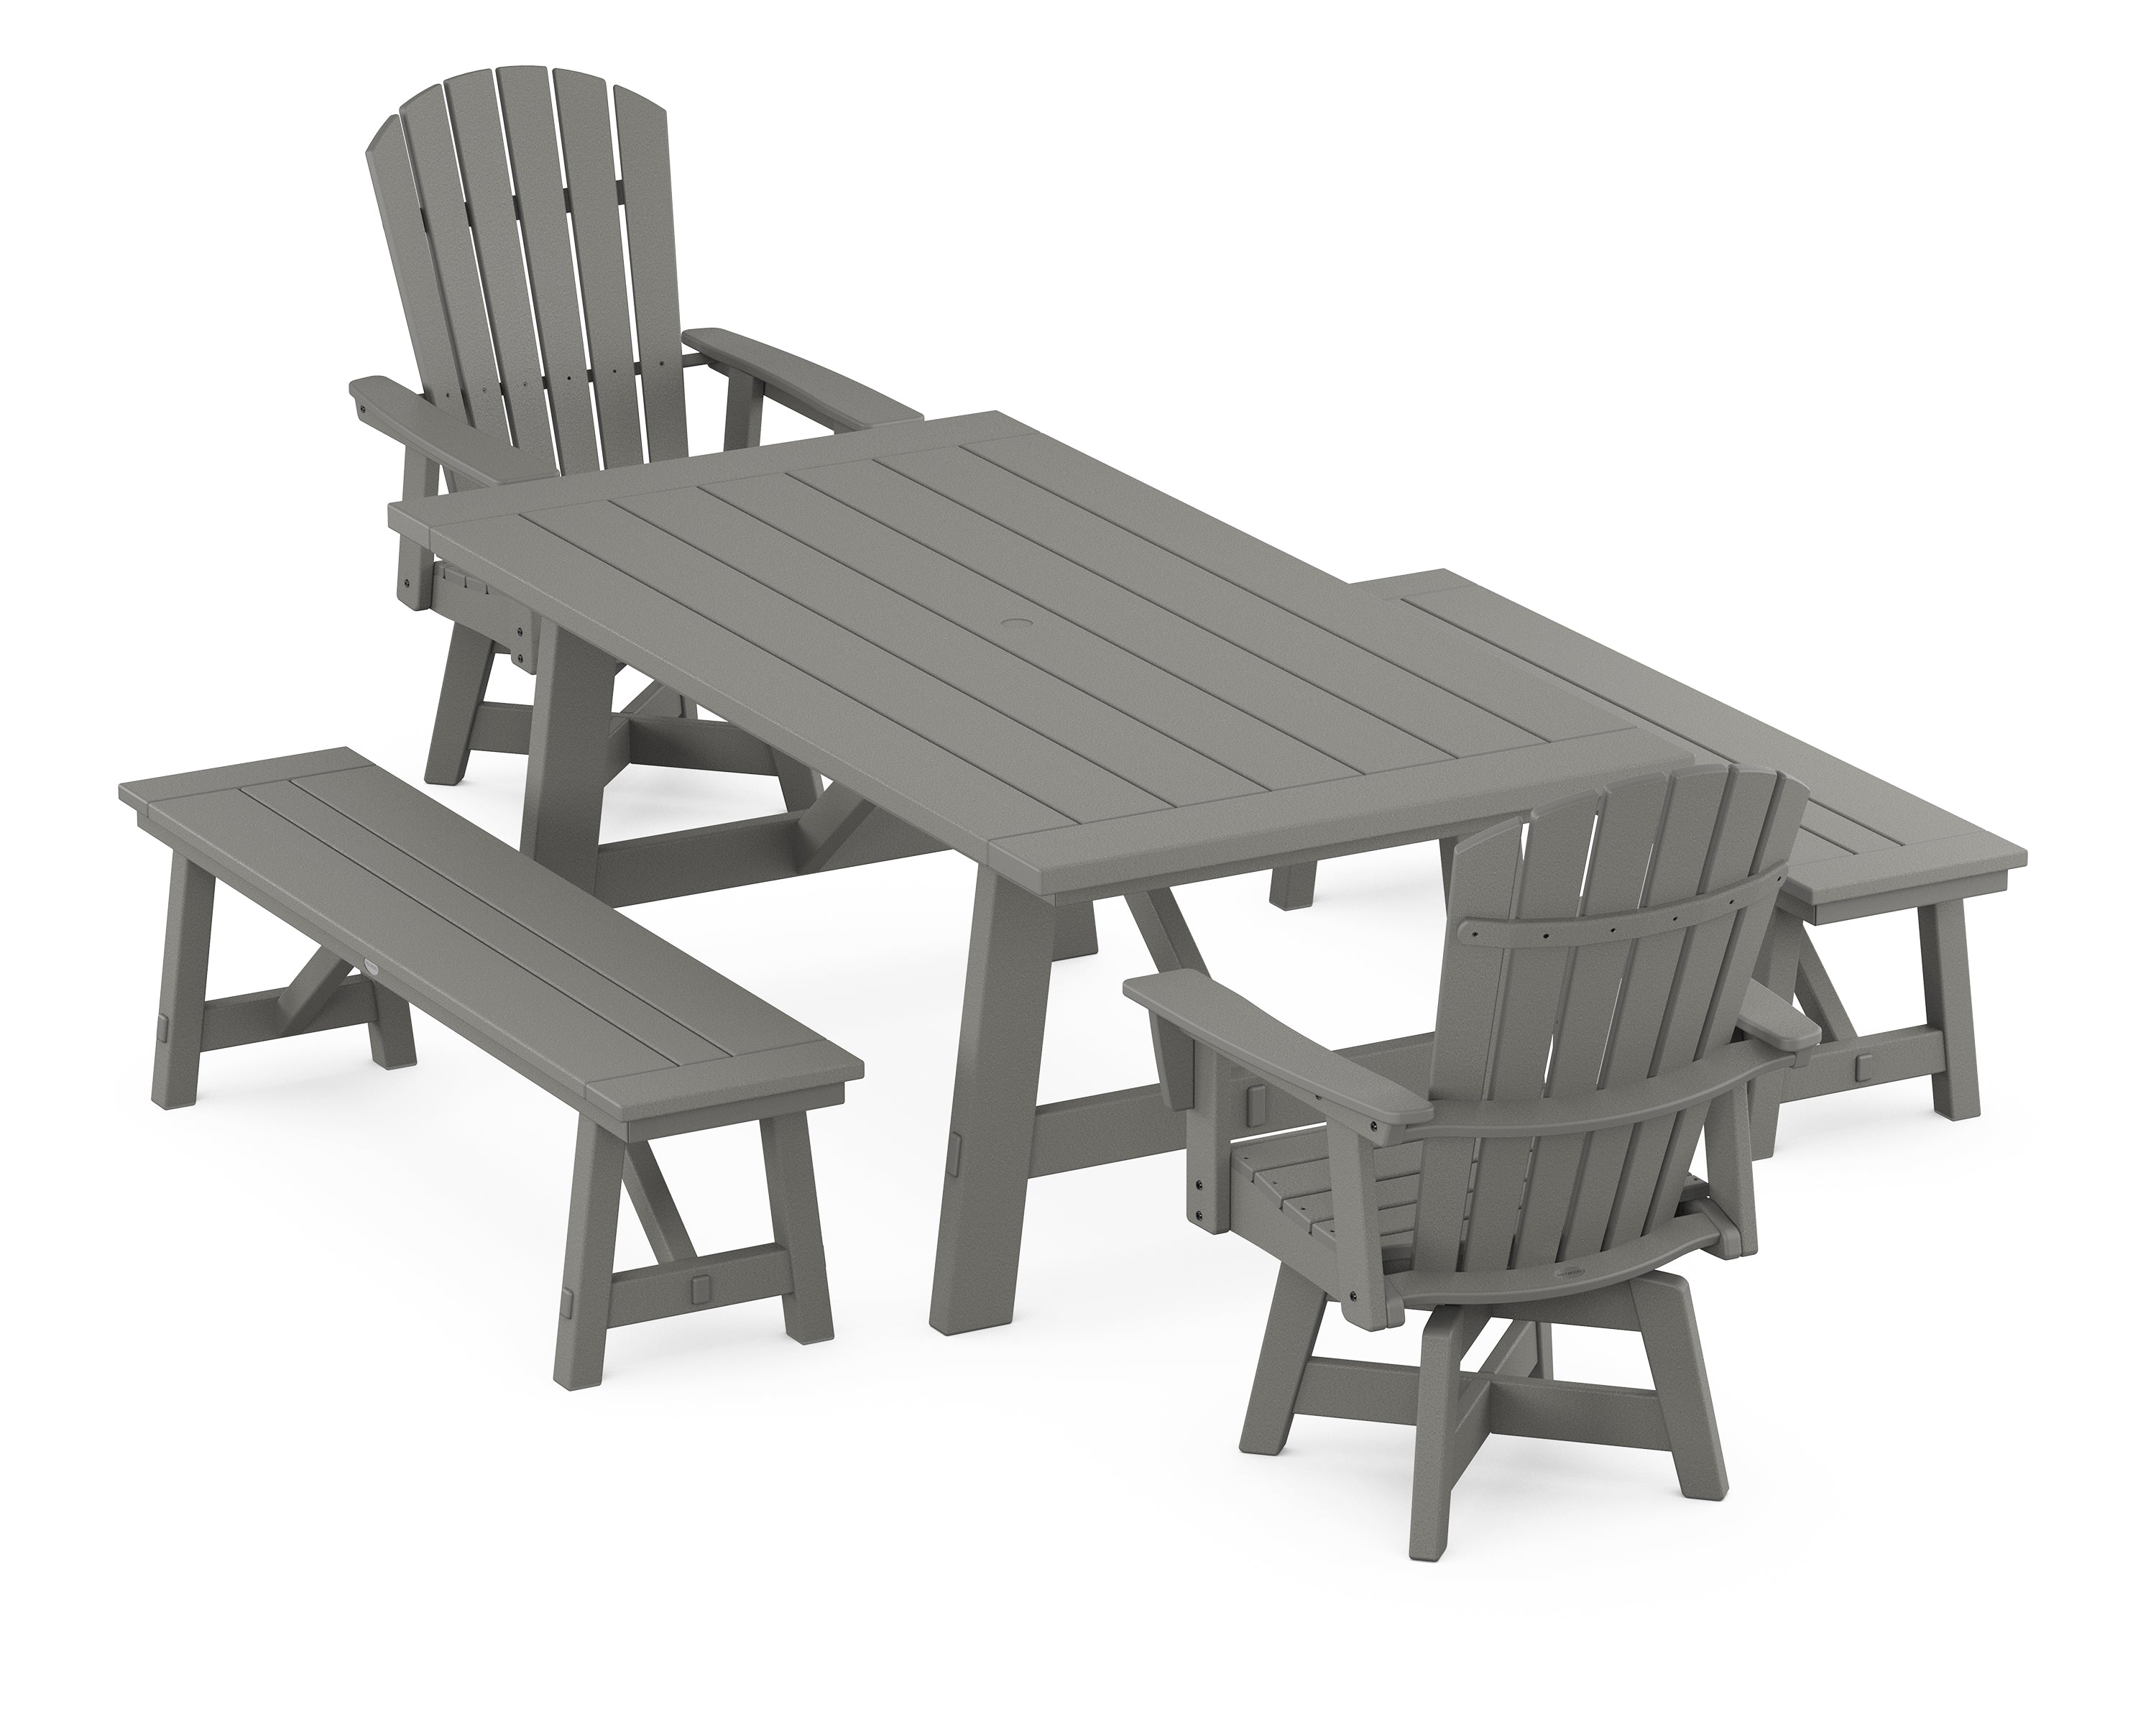 POLYWOOD® Nautical Curveback Adirondack Swivel Chair 5-Piece Rustic Farmhouse Dining Set With Benches in Slate Grey